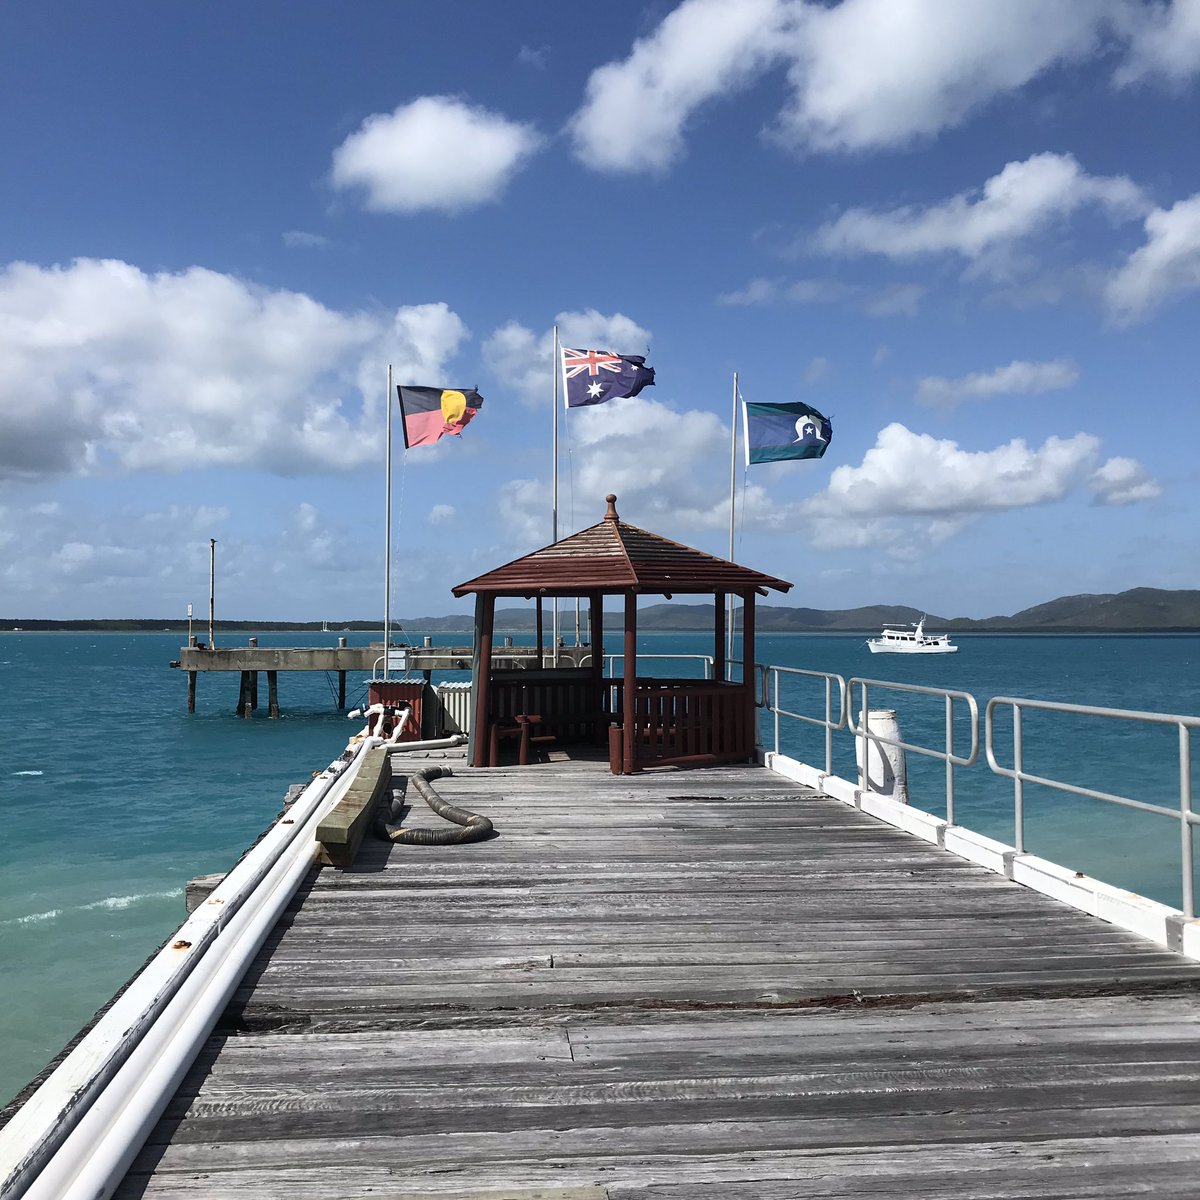 We’ve just arrived on Thursday Island for the #intrustsupercup game tonight. What a beautiful place. Can’t wait to see the fields. #CountryWeek